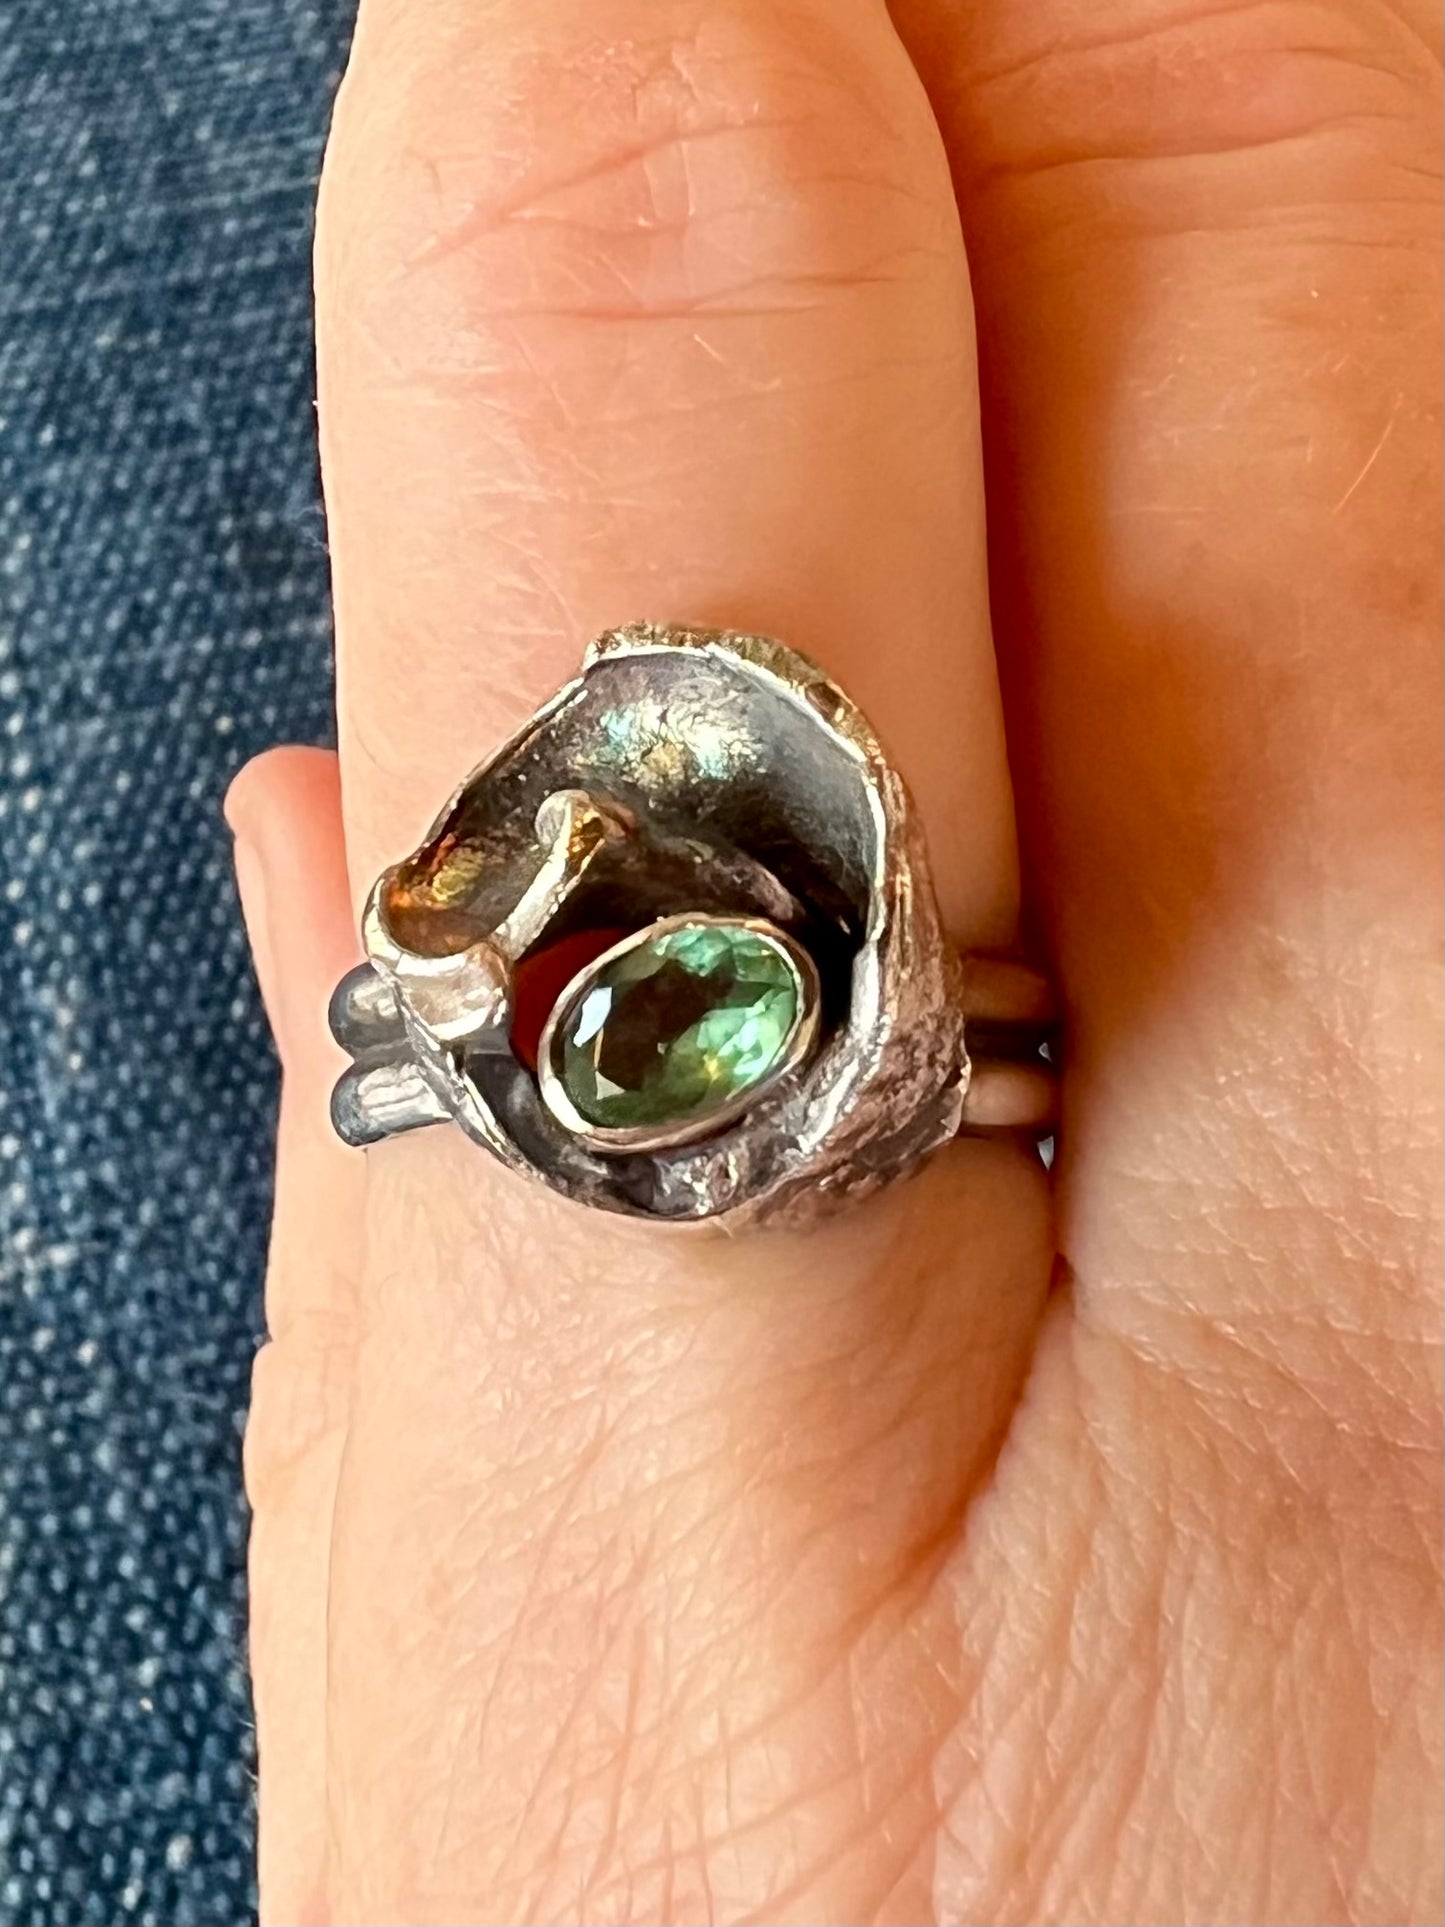 Oxidized Sterling Silver Conch Shell Fragment Ring with Misty Green Tourmaline - Salt Series - One of a Kind